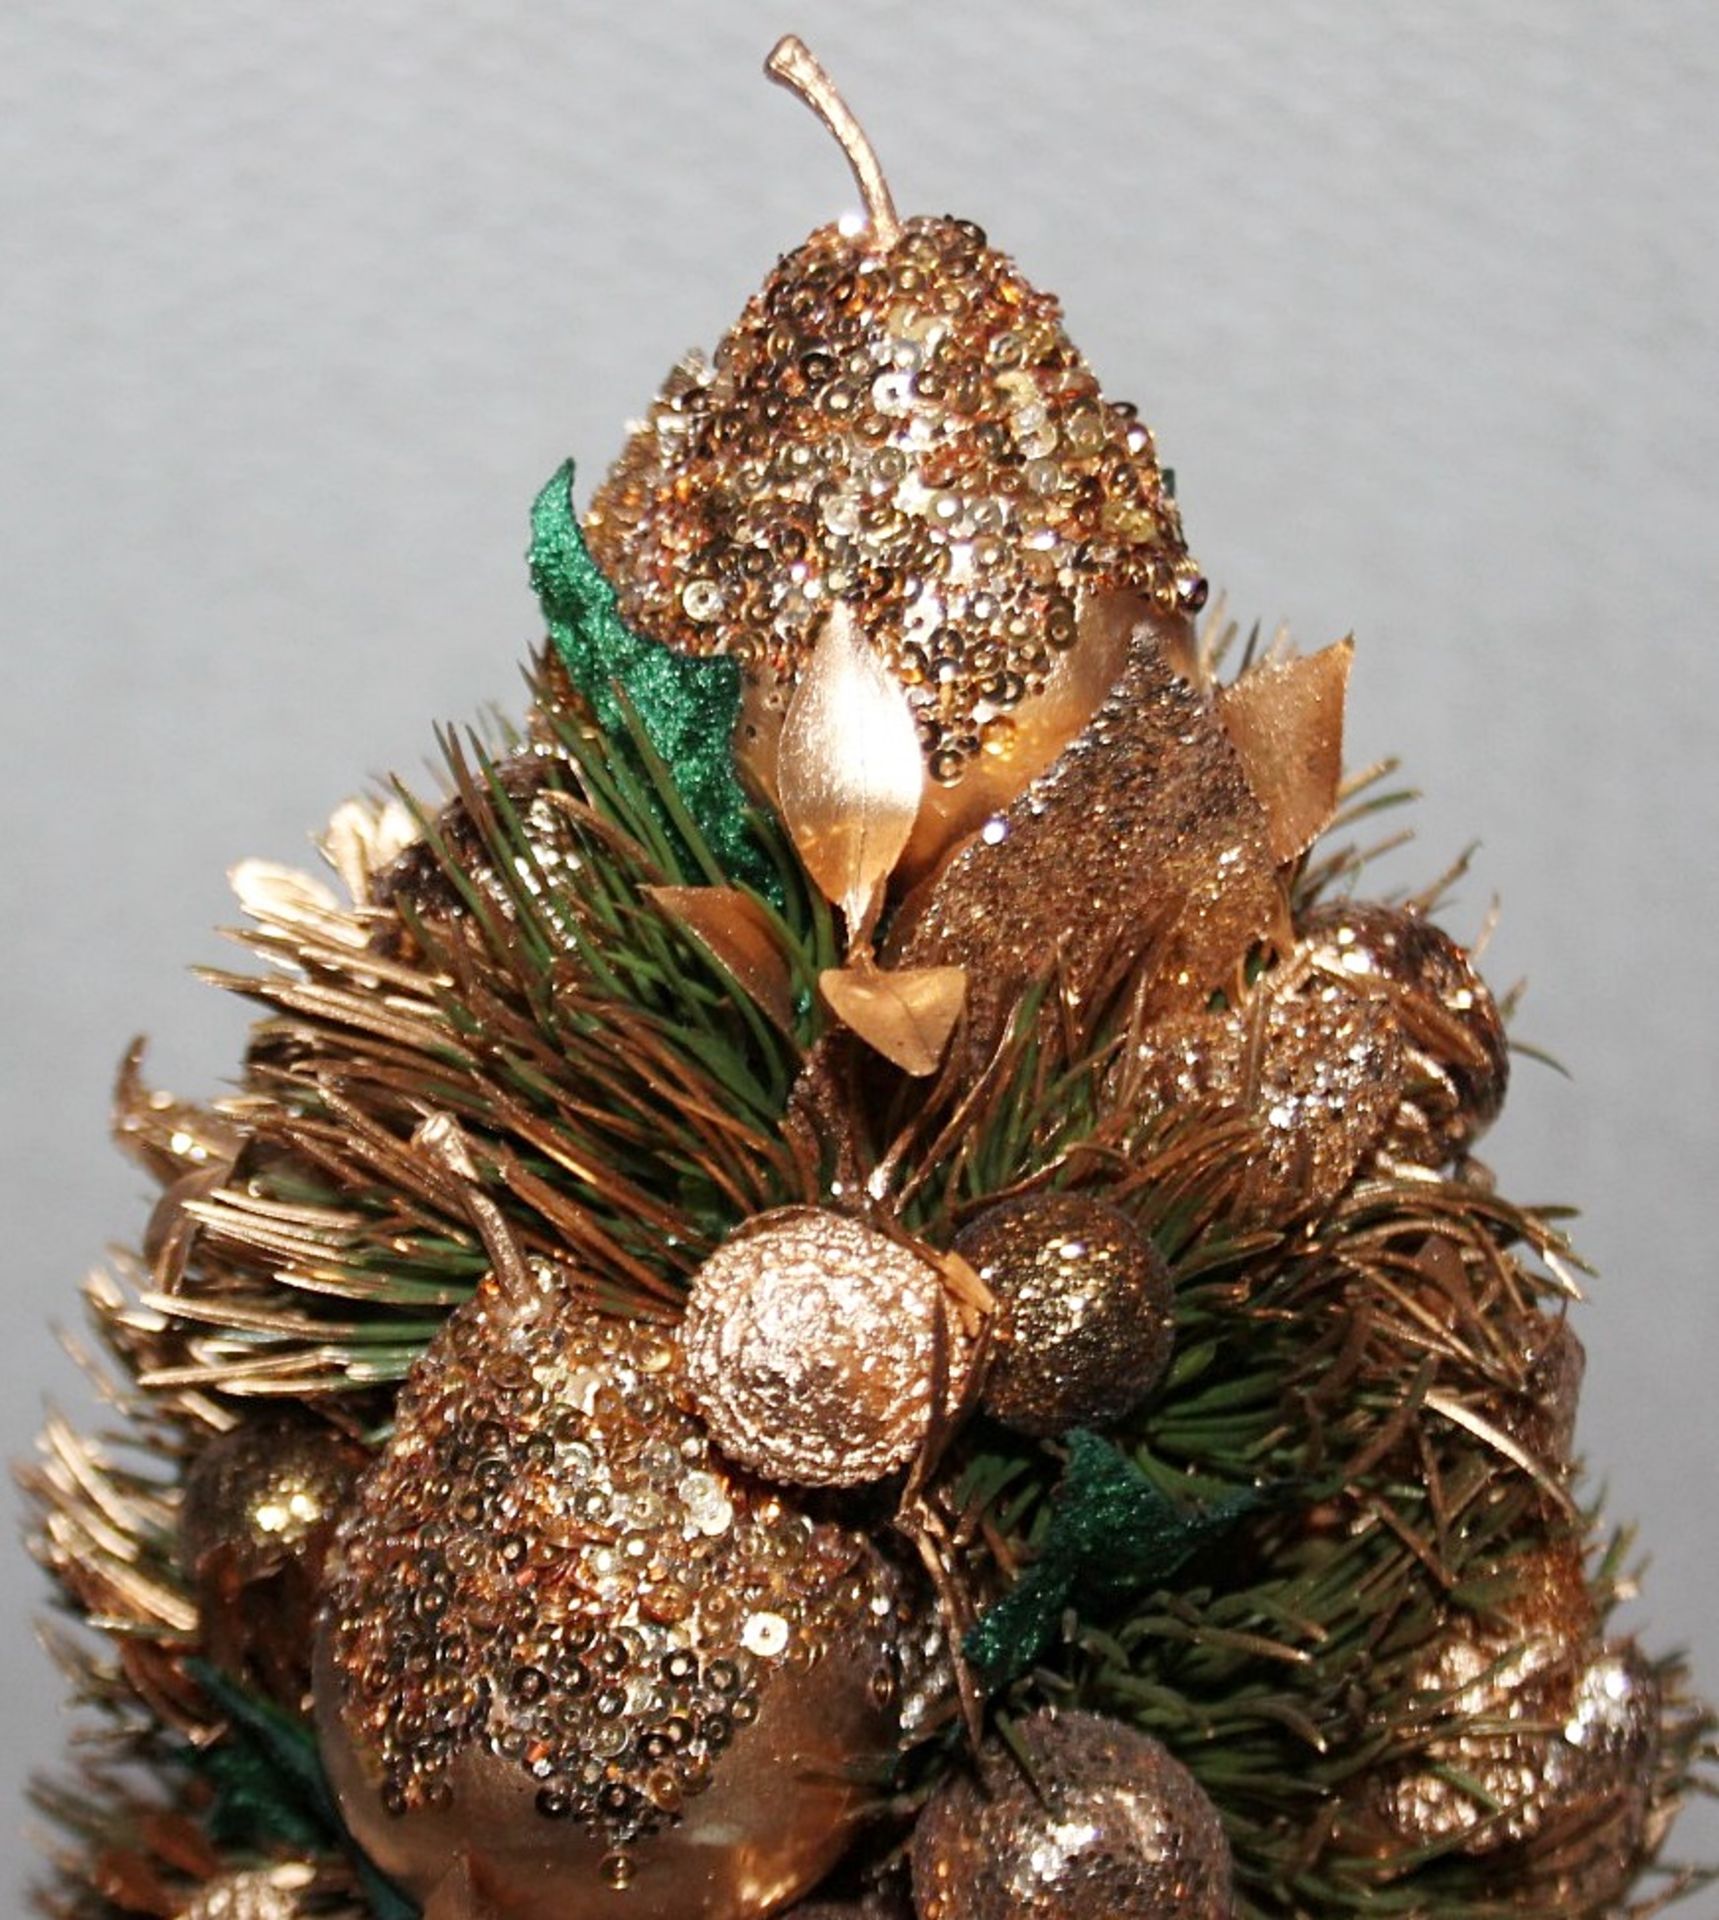 1 x SALZBURG CREATIONS Decorative 'Pear Tree' Ornament In Gold & Green - 18 Inches Tall - Original - Image 3 of 7